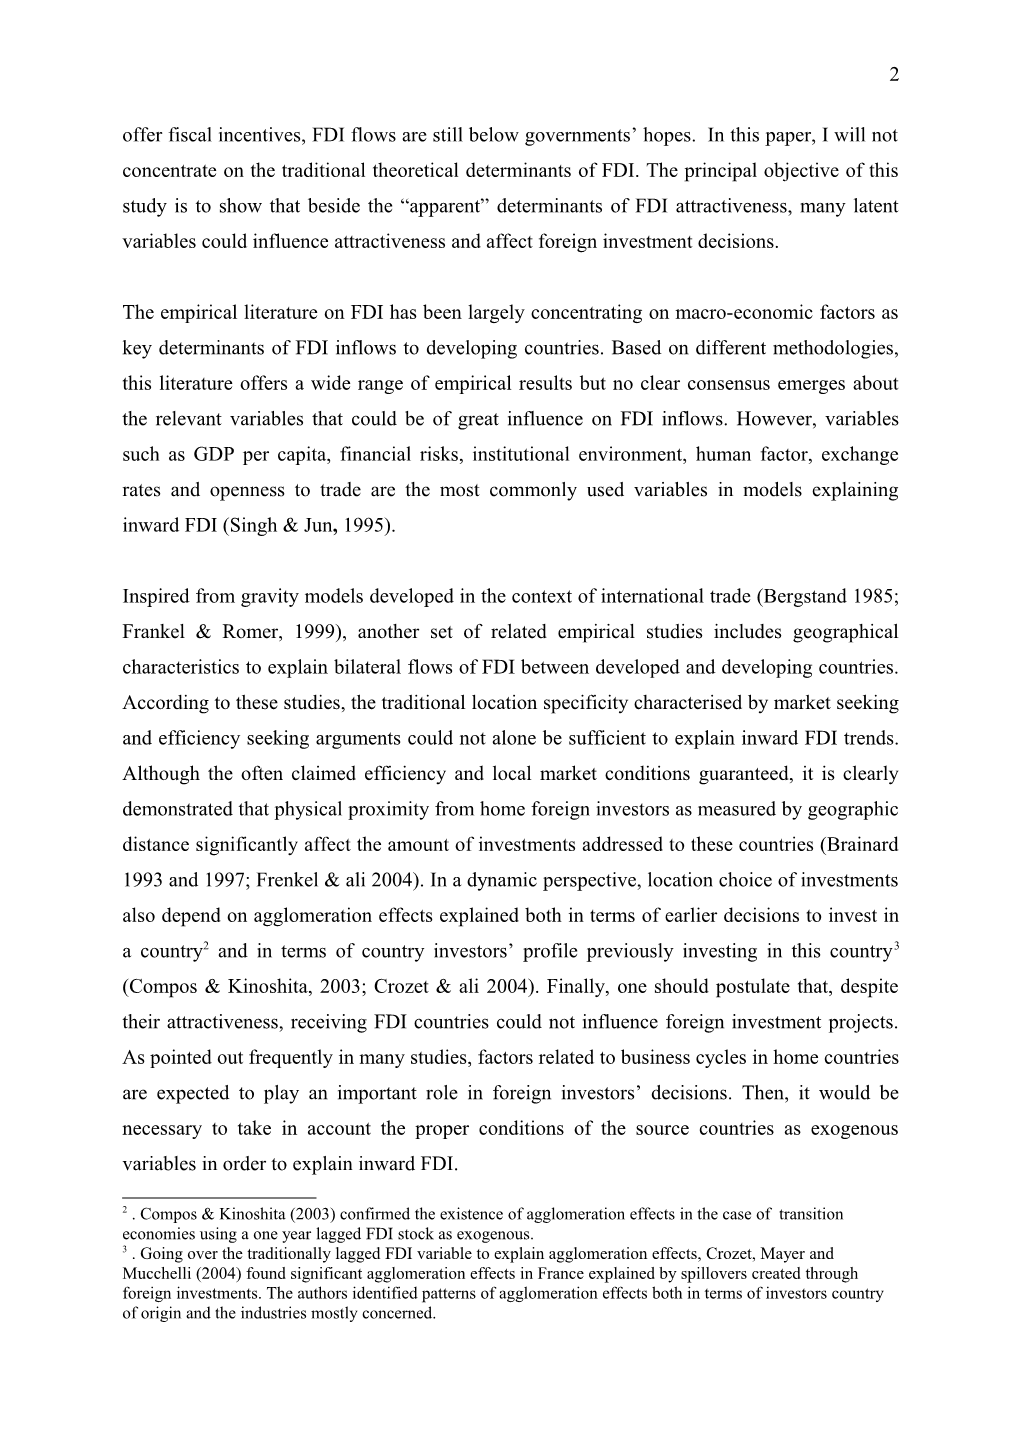 Foreign Direct Investment Decisions and Fixed Setup Costs in Developing Countries: The